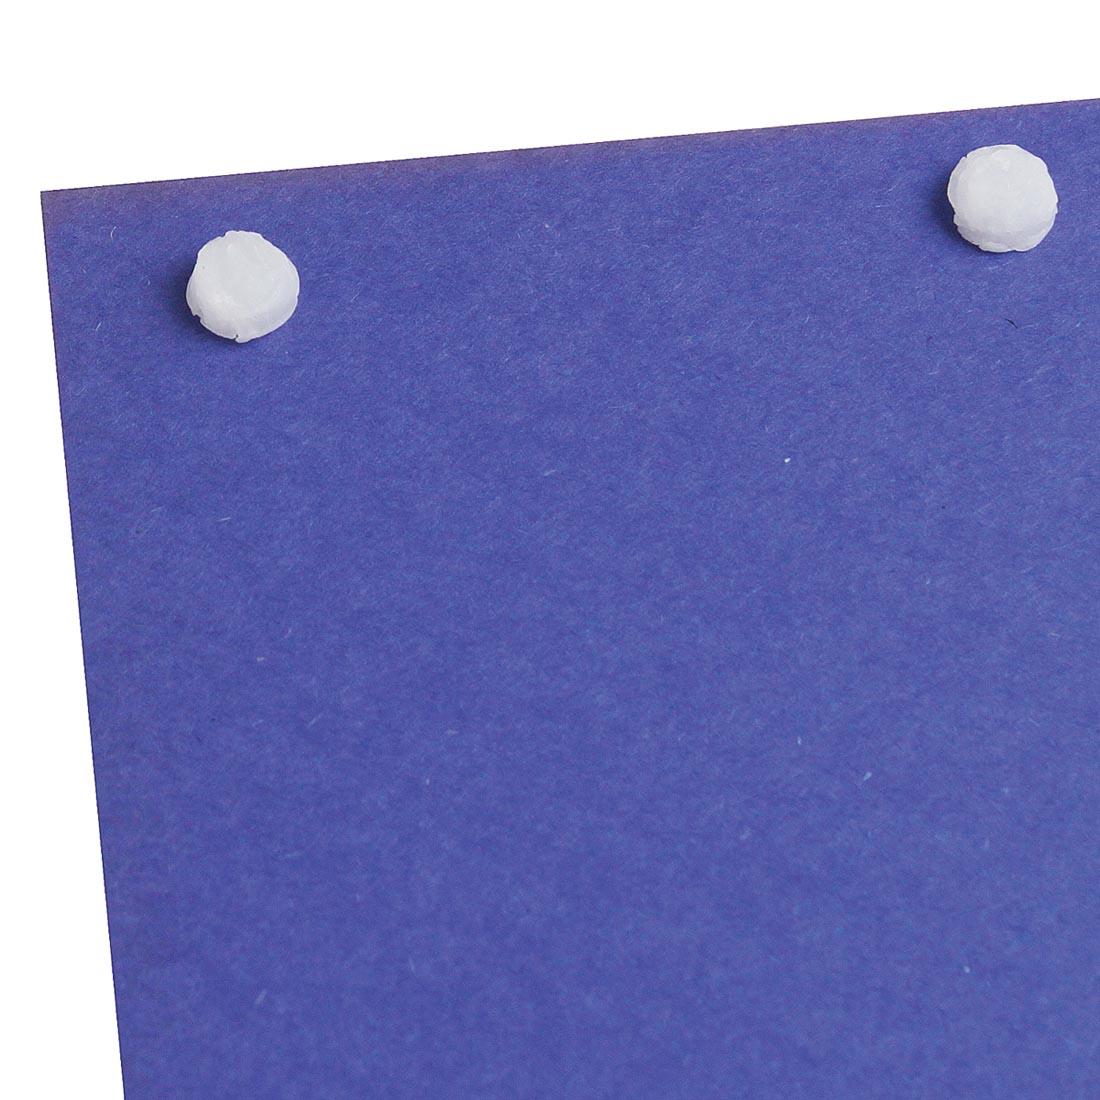 Two StikkiWax Dots on a piece of purple paper